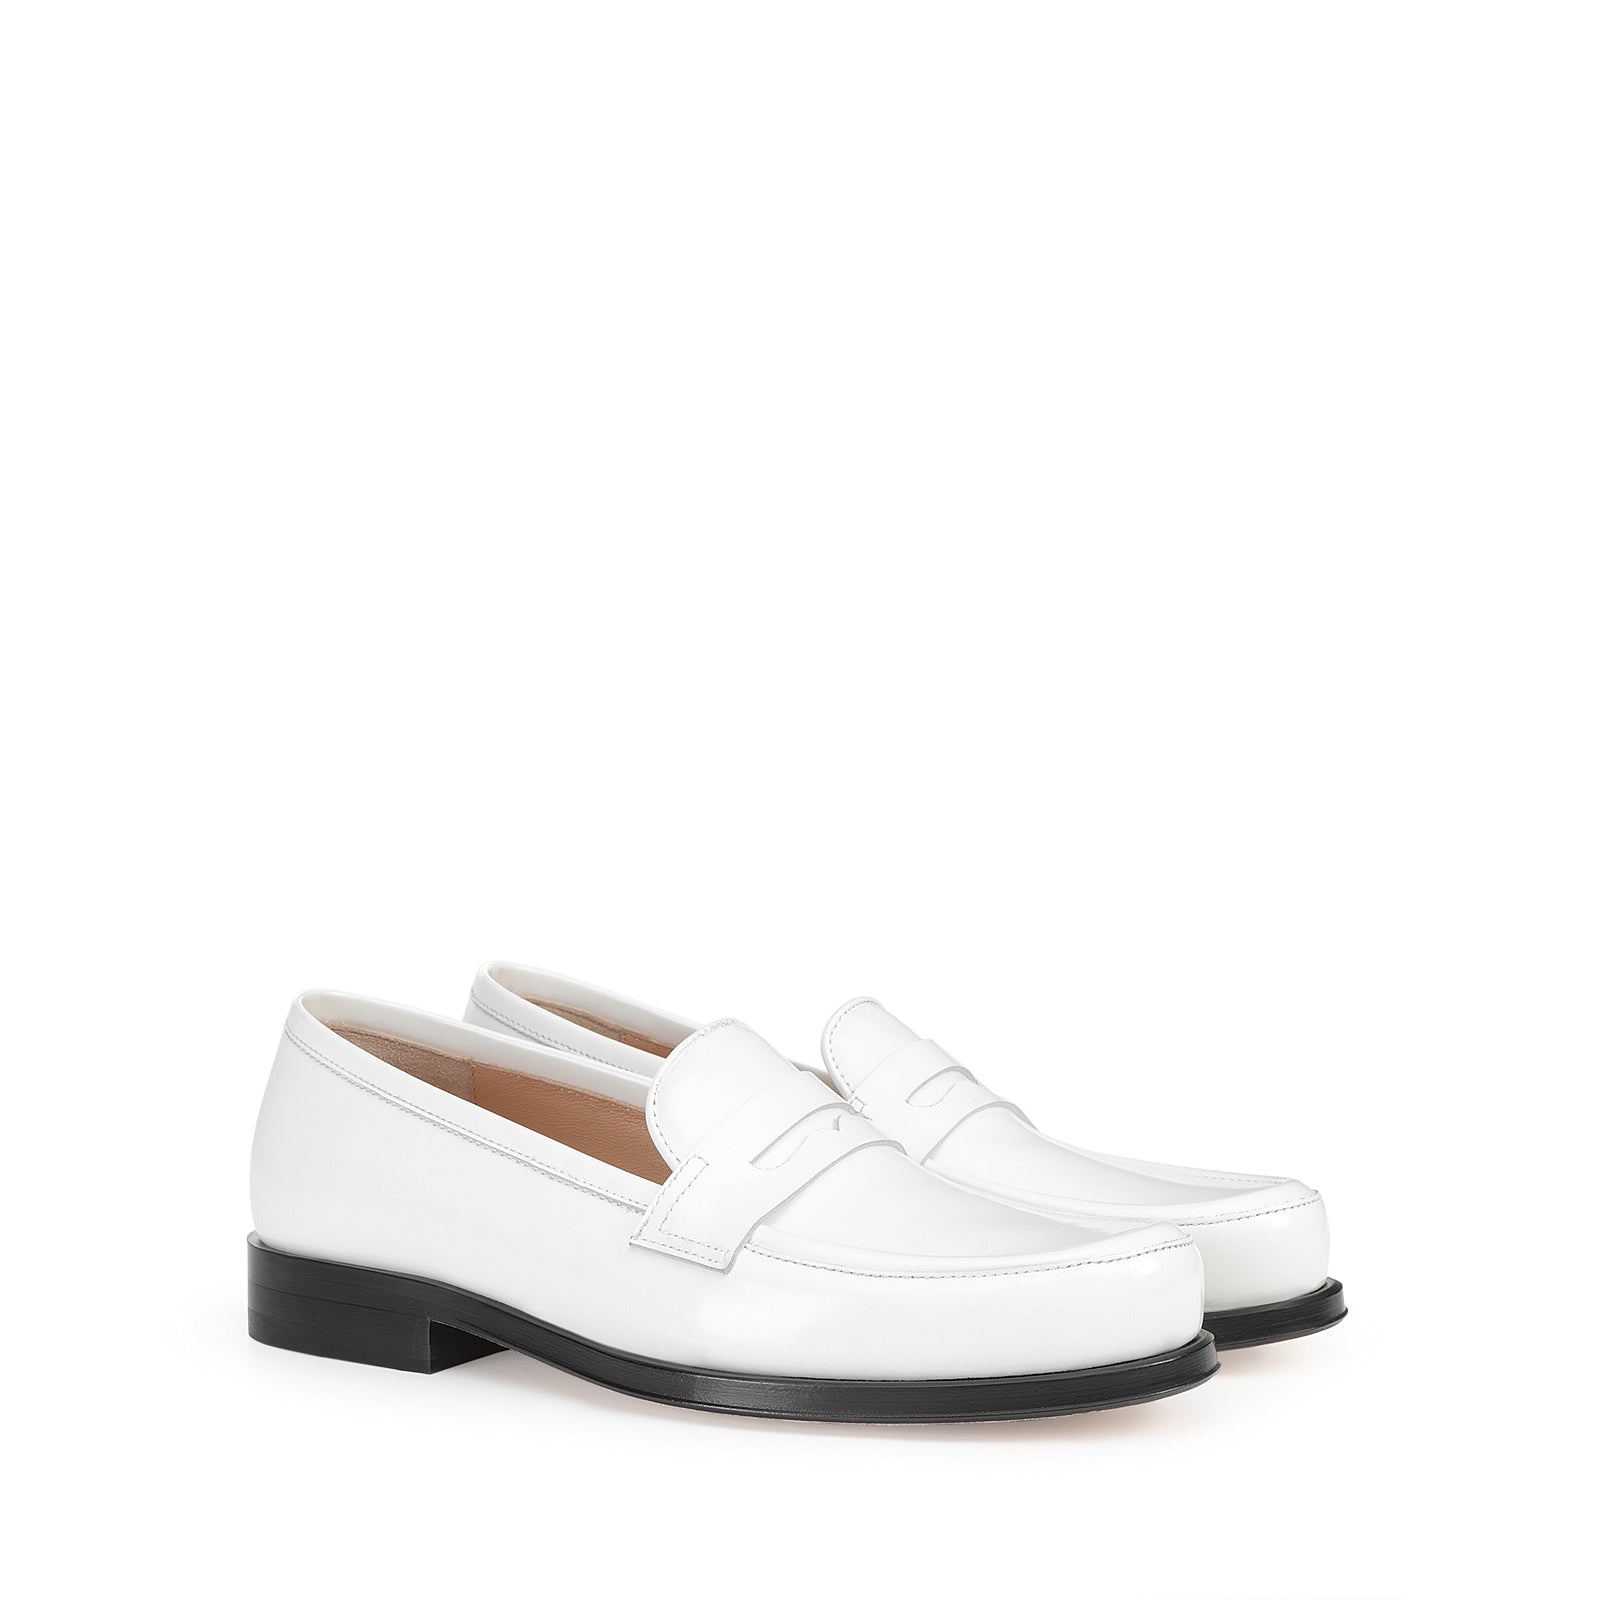 Sr College Loafers - Bianco